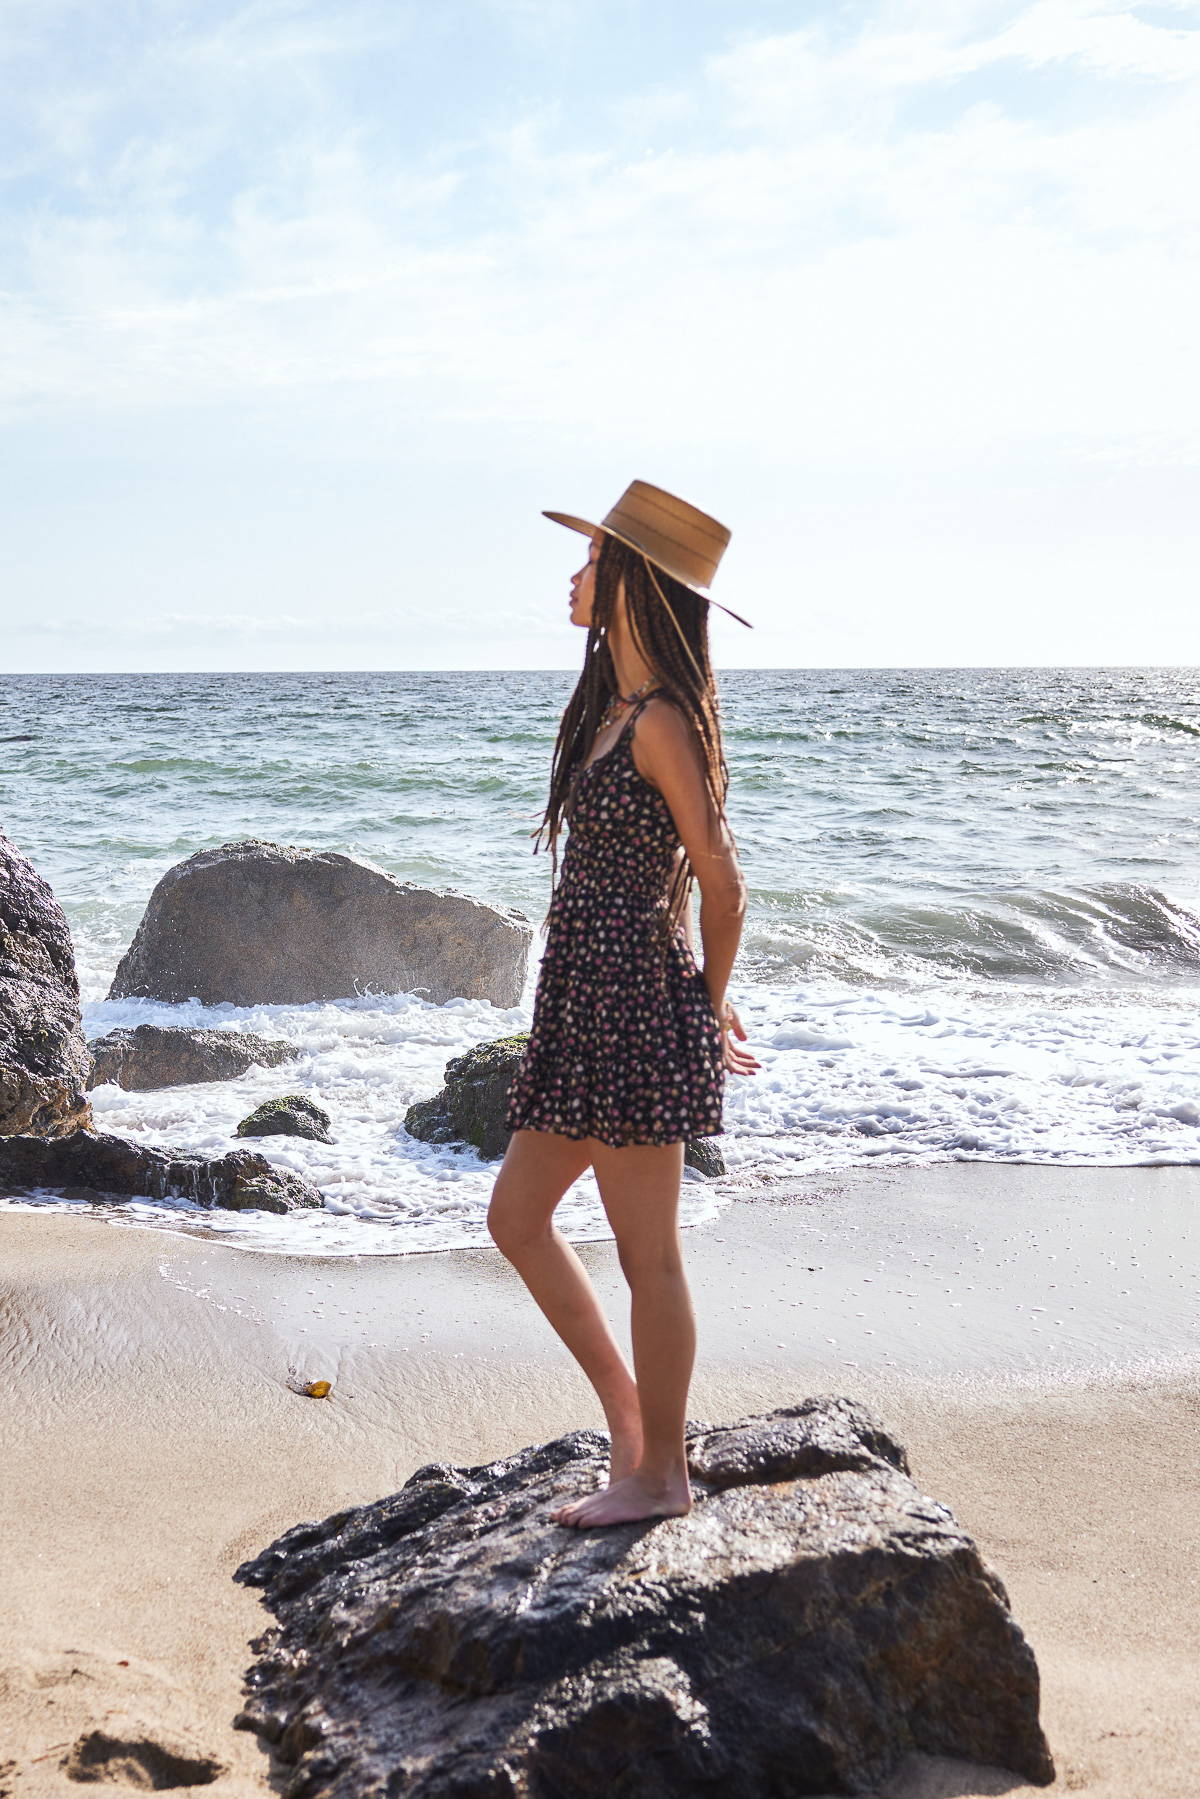 Trixxi sun-kissed summer, girl at oceanside beach sane in ditsy floral tier tank dress.